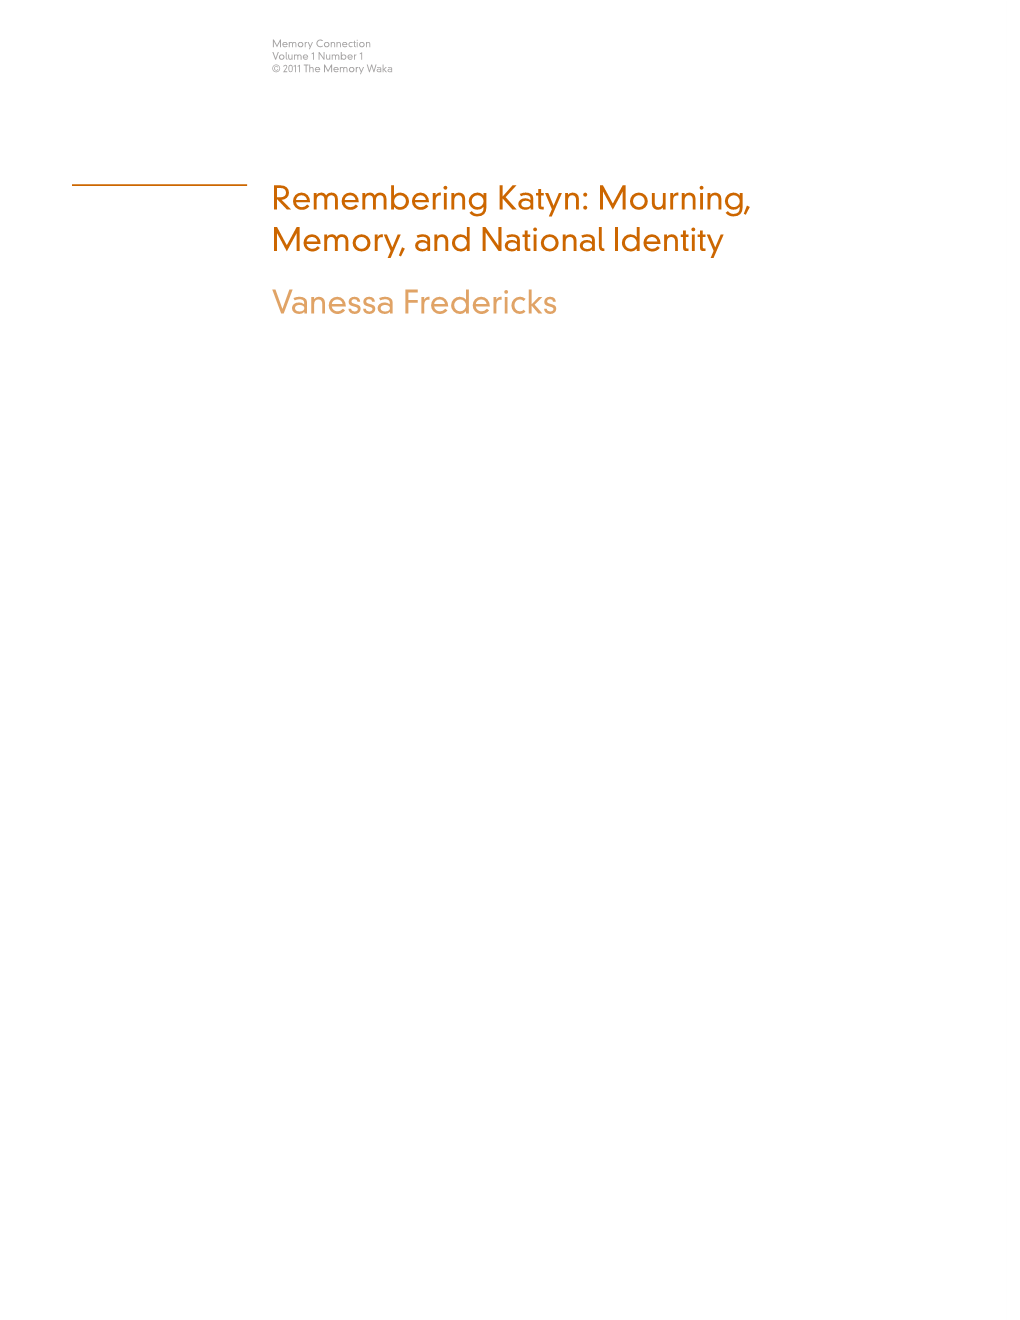 Remembering Katyn: Mourning, Memory, and National Identity Vanessa Fredericks Memory Connection Volume 1 Number 1 © 2011 the Memory Waka